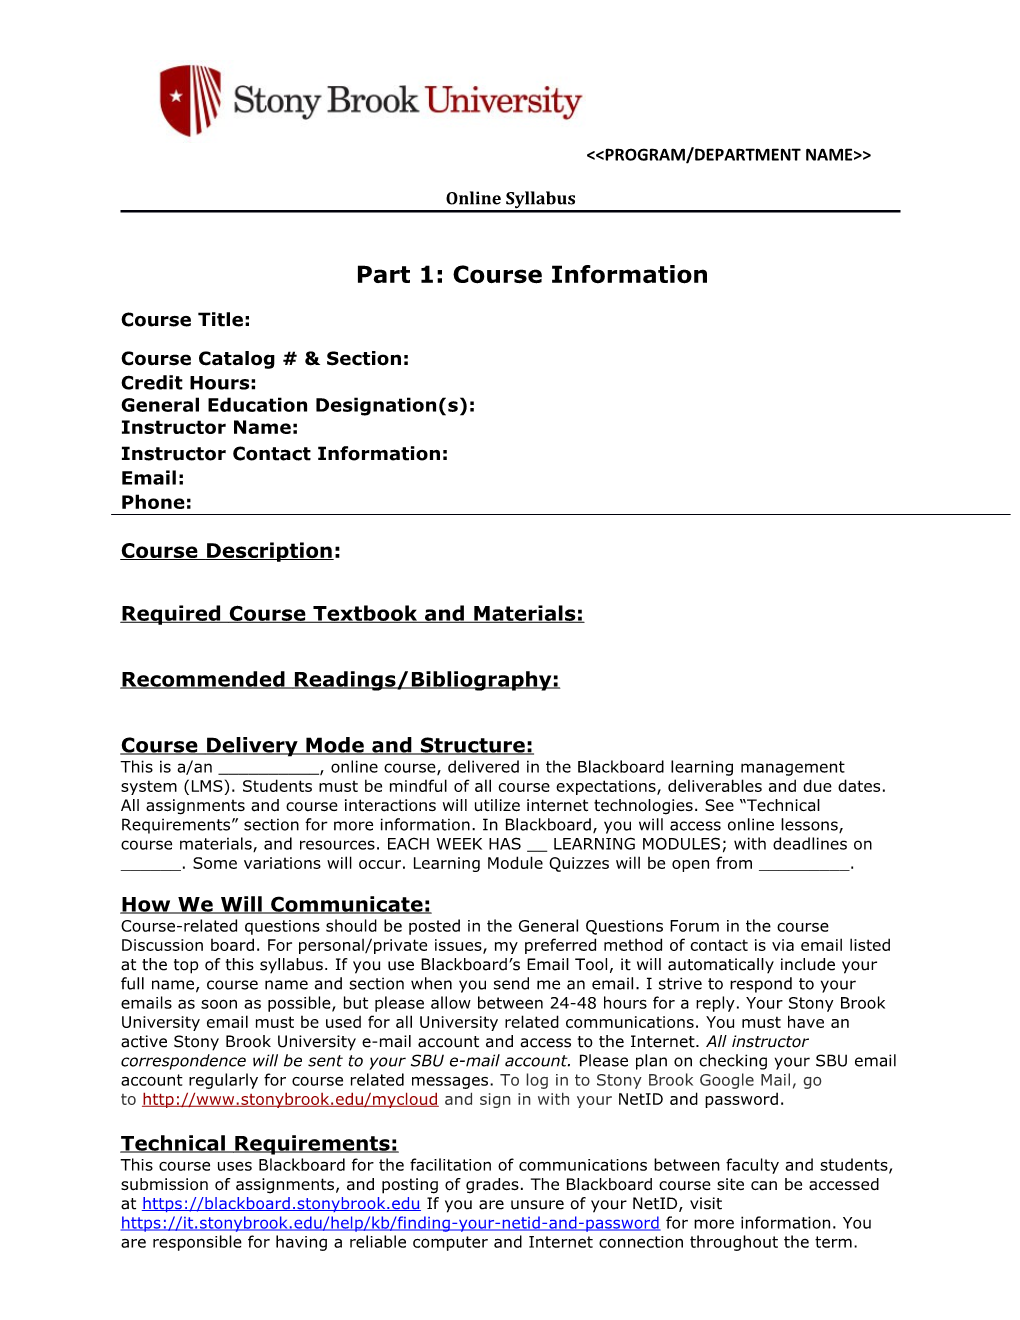 Required Office6 Course Textbook and Materials